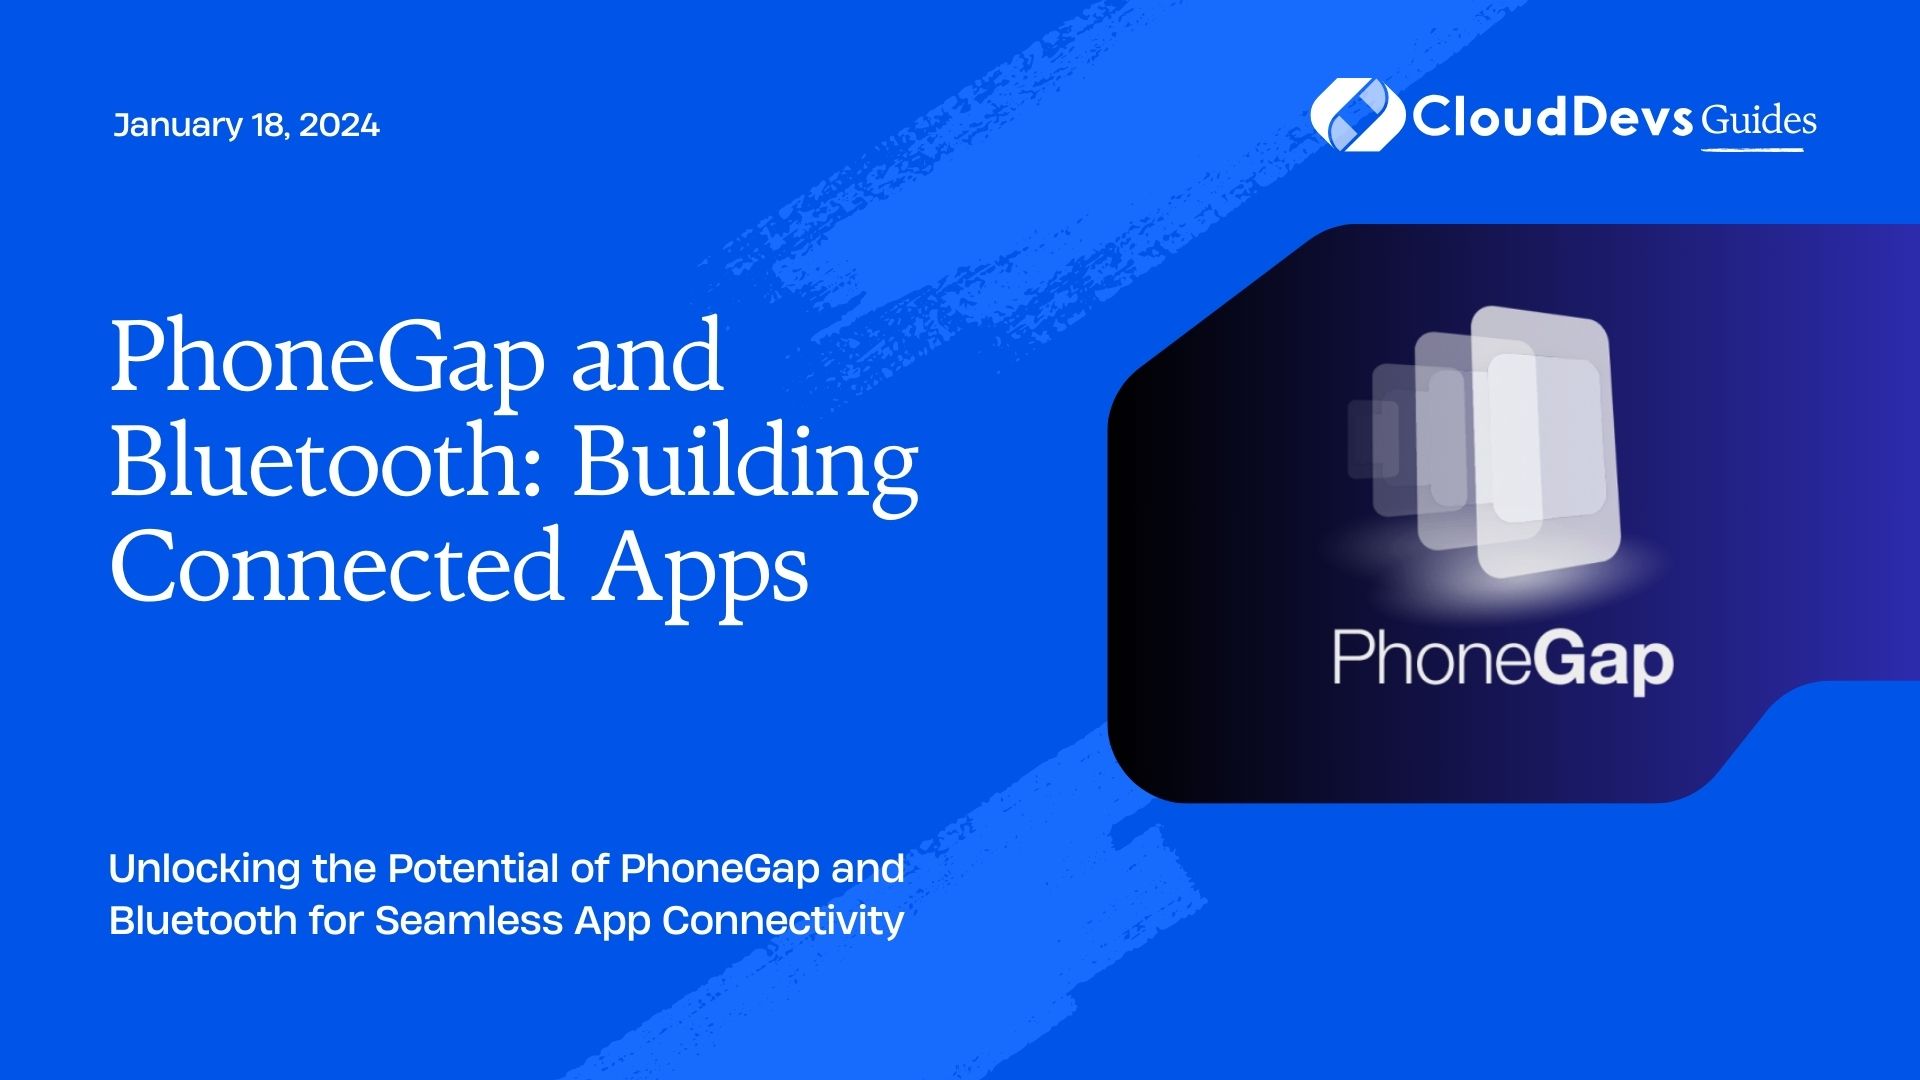 PhoneGap and Bluetooth: Building Connected Apps